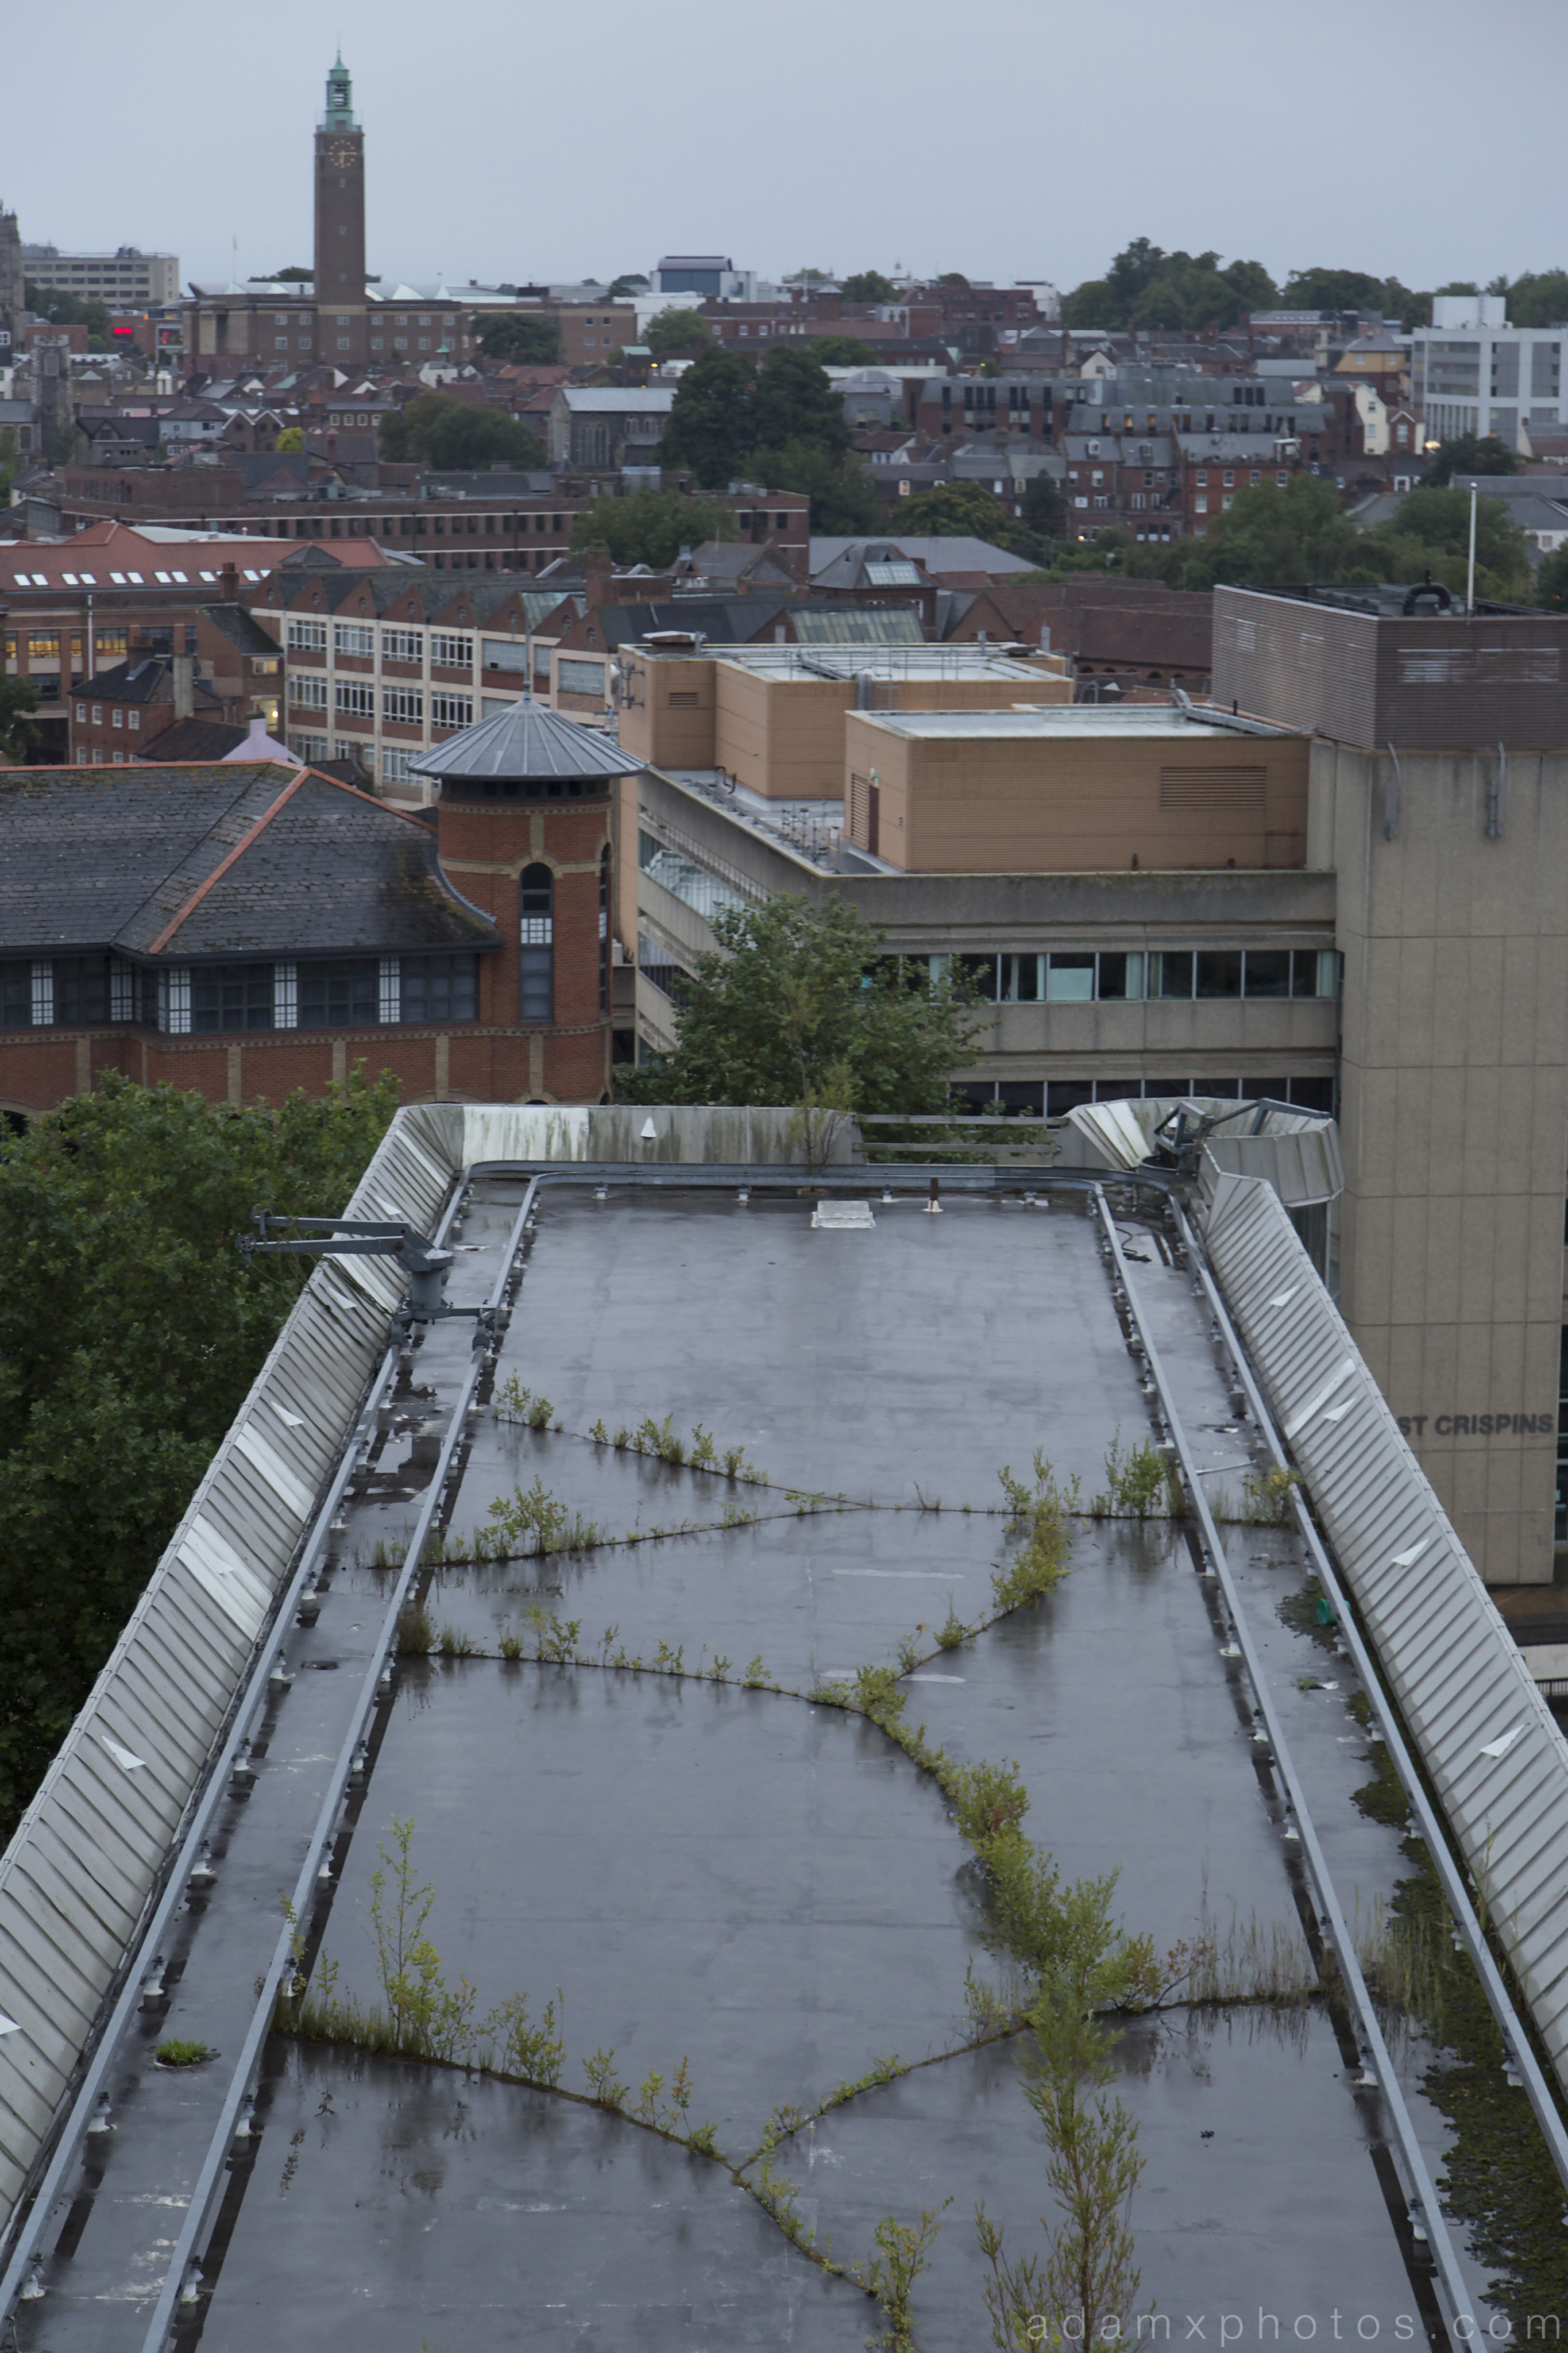 Roof Sovereign House HMSO Norwich Urbex Adam X Urban Exploration 2015 Abandoned decay lost forgotten derelict